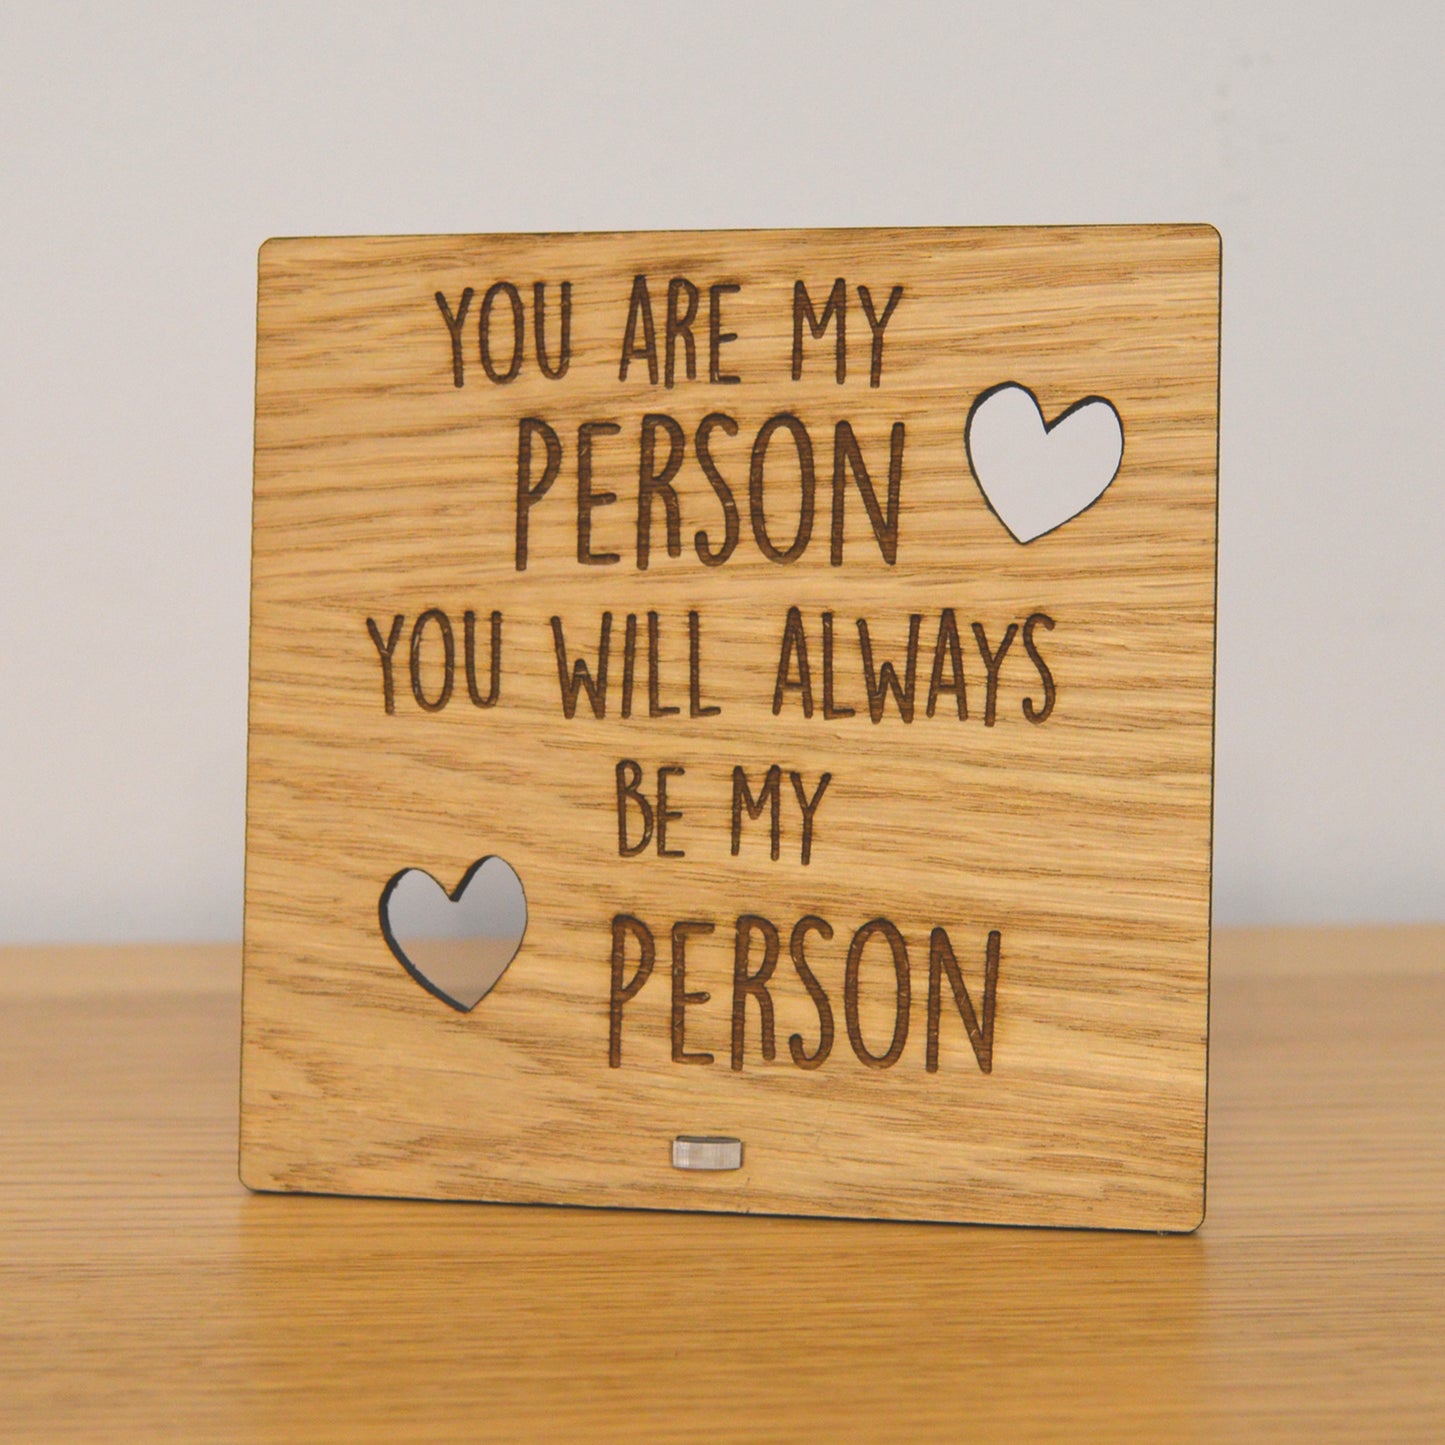 You Are My Person - Grey's Anatomy Gift - Valentines Day Wooden Plaque